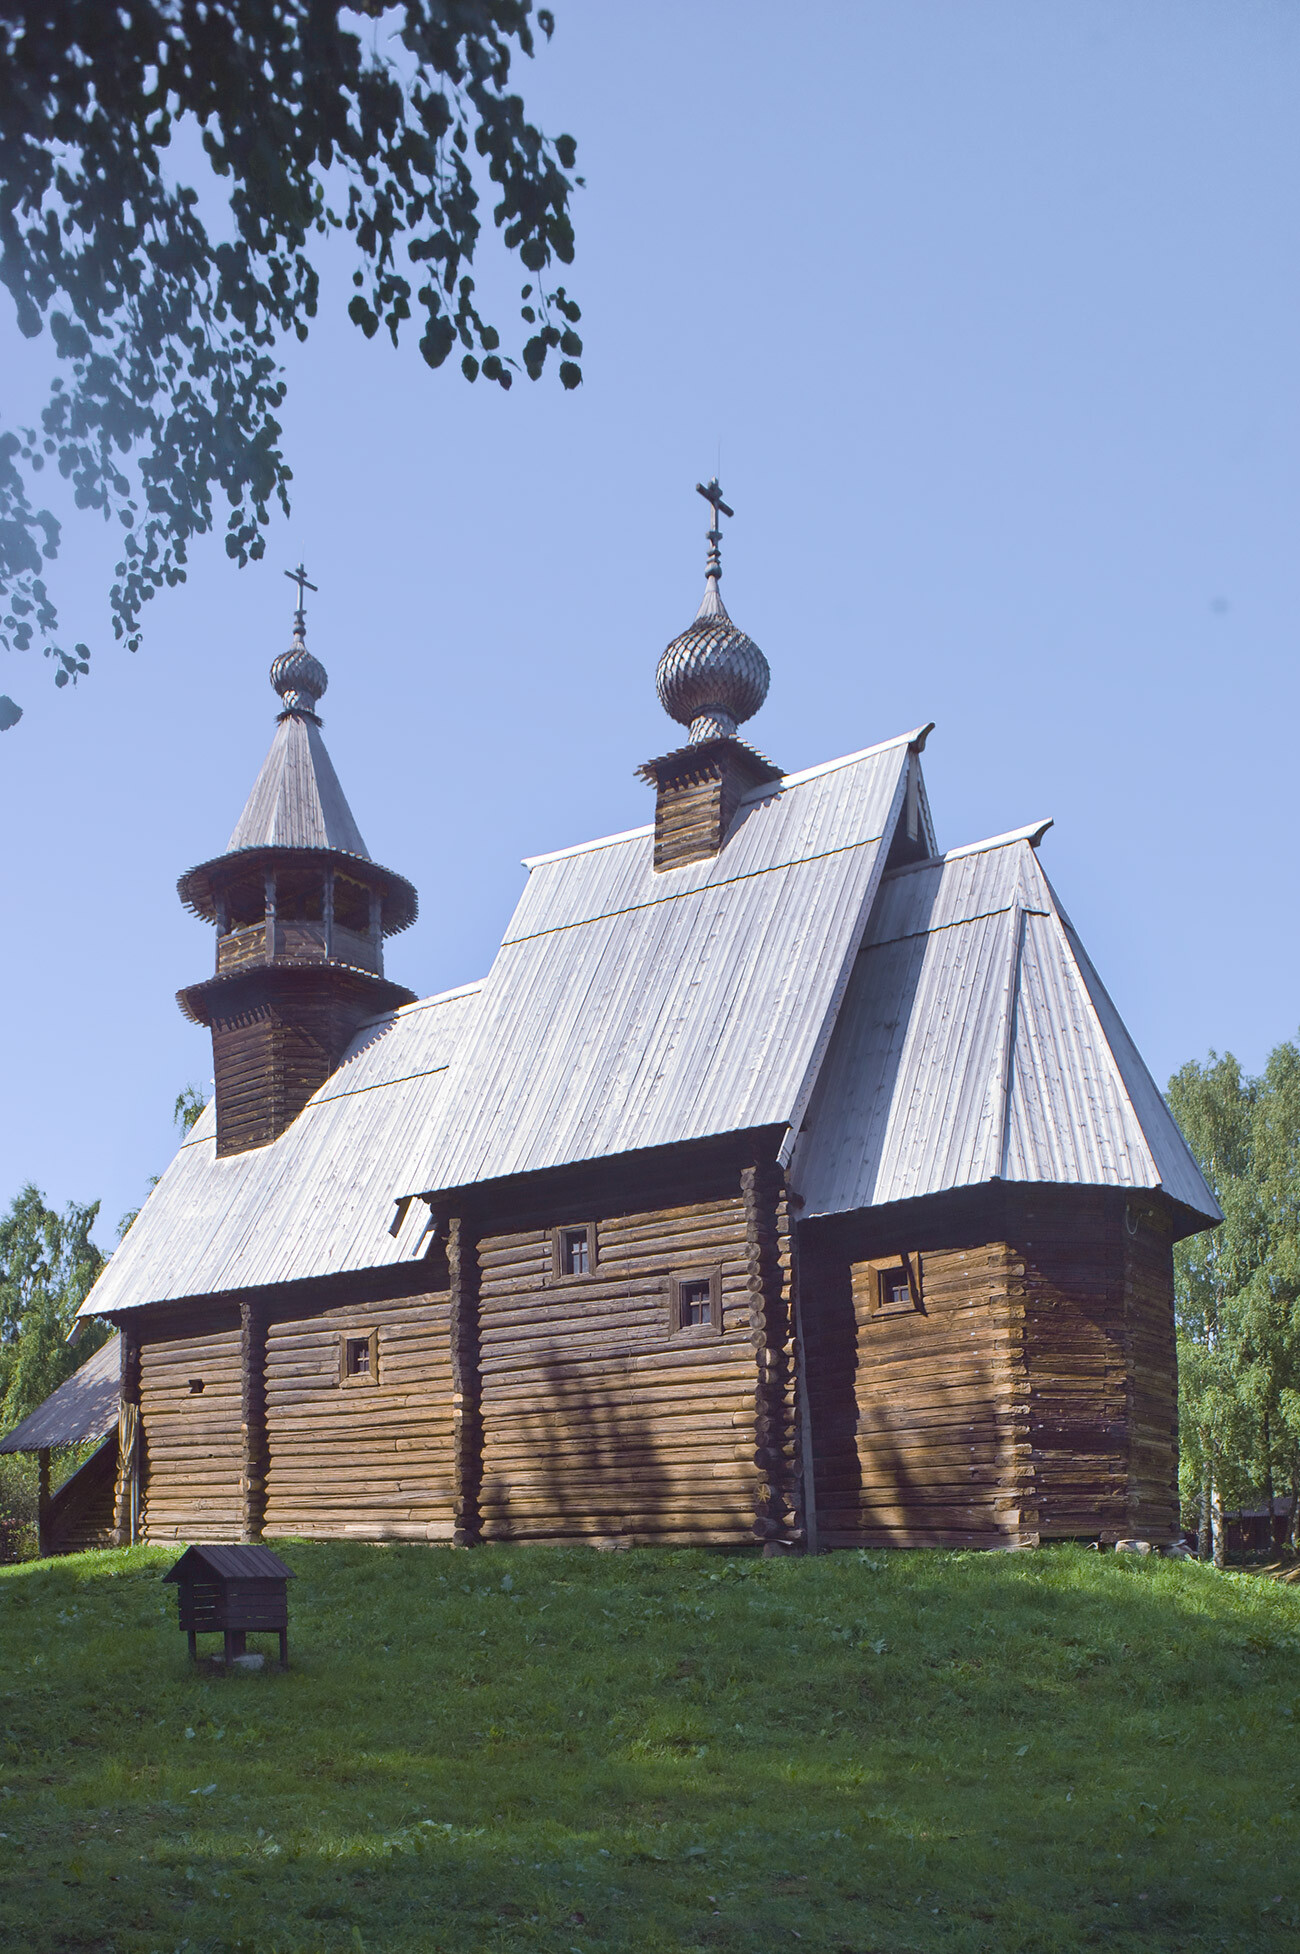 Kostroma Old Quarter. Church of the Icon of Most Merciful Savior, from Fominskoe village. Southeast view. August 13, 2017